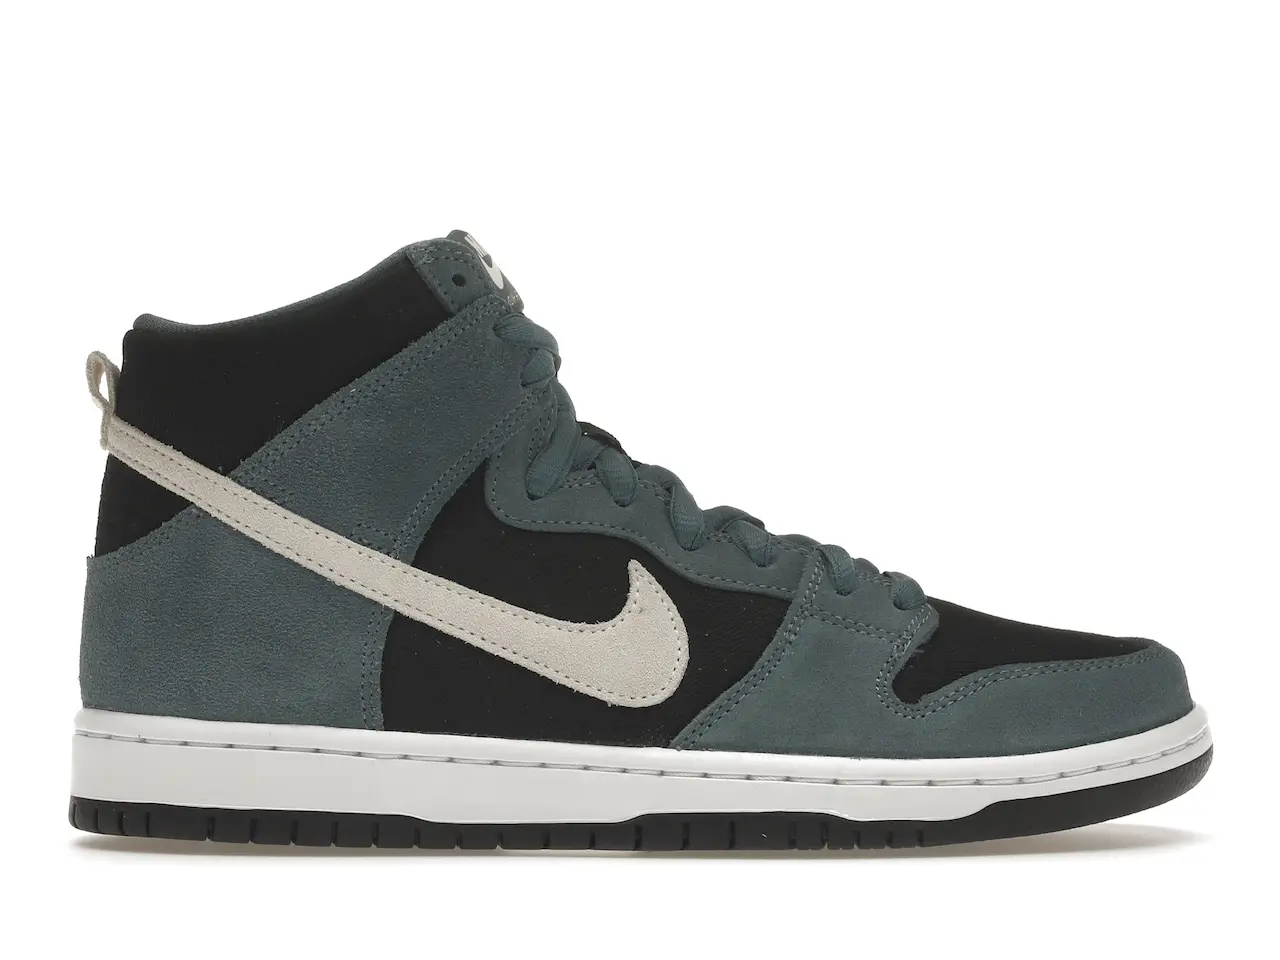 Nike SB Dunk High Pro Mineral Slate Suede Men's - DQ3757-300 - US